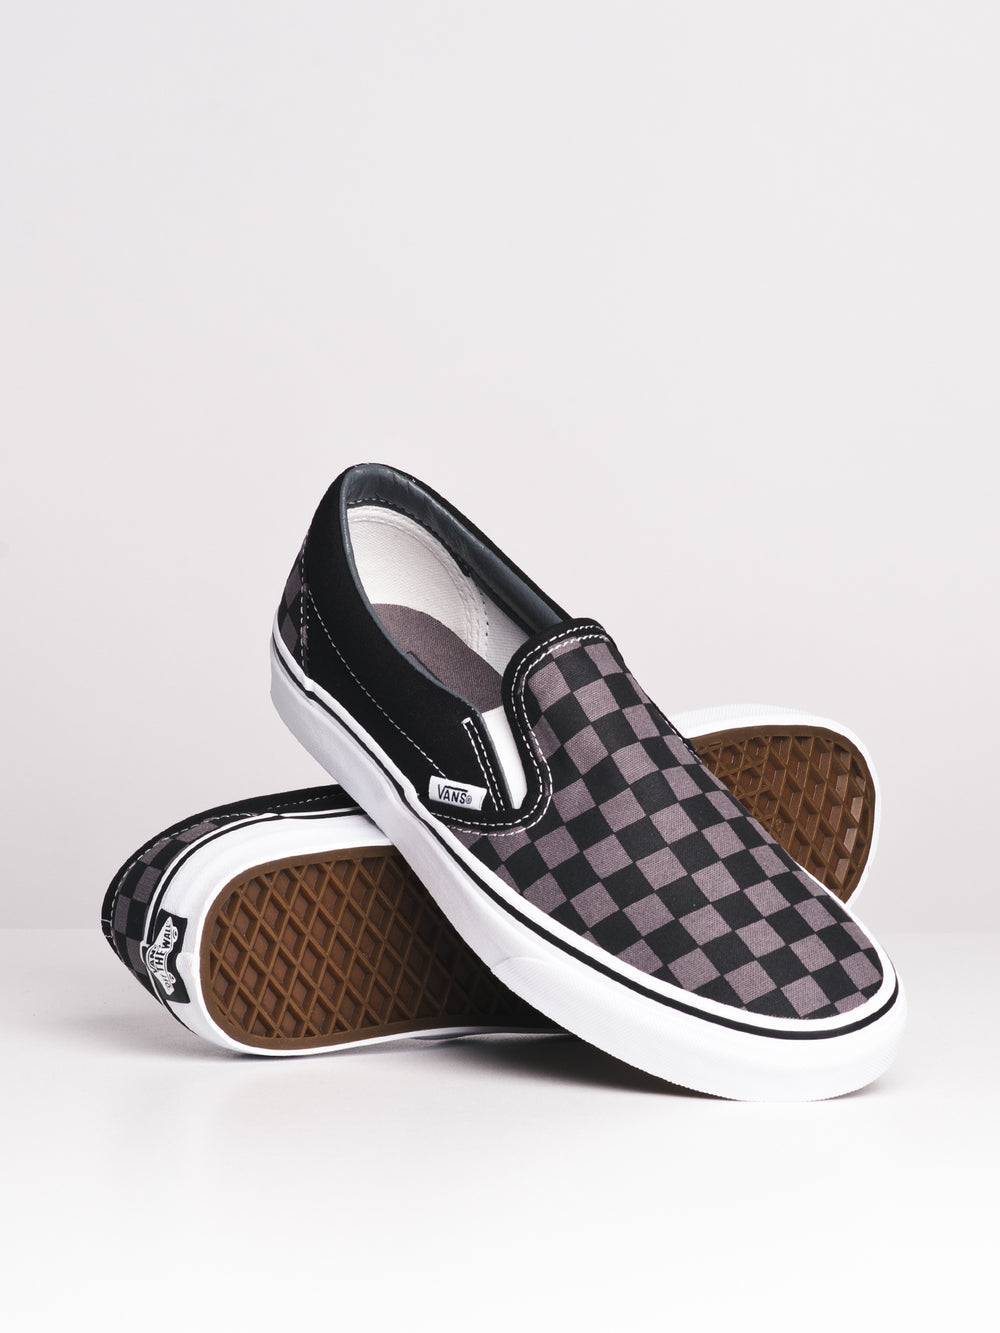 MENS VANS CLASSIC SLIP-ON CHECKERBOARD CANVAS SHOES